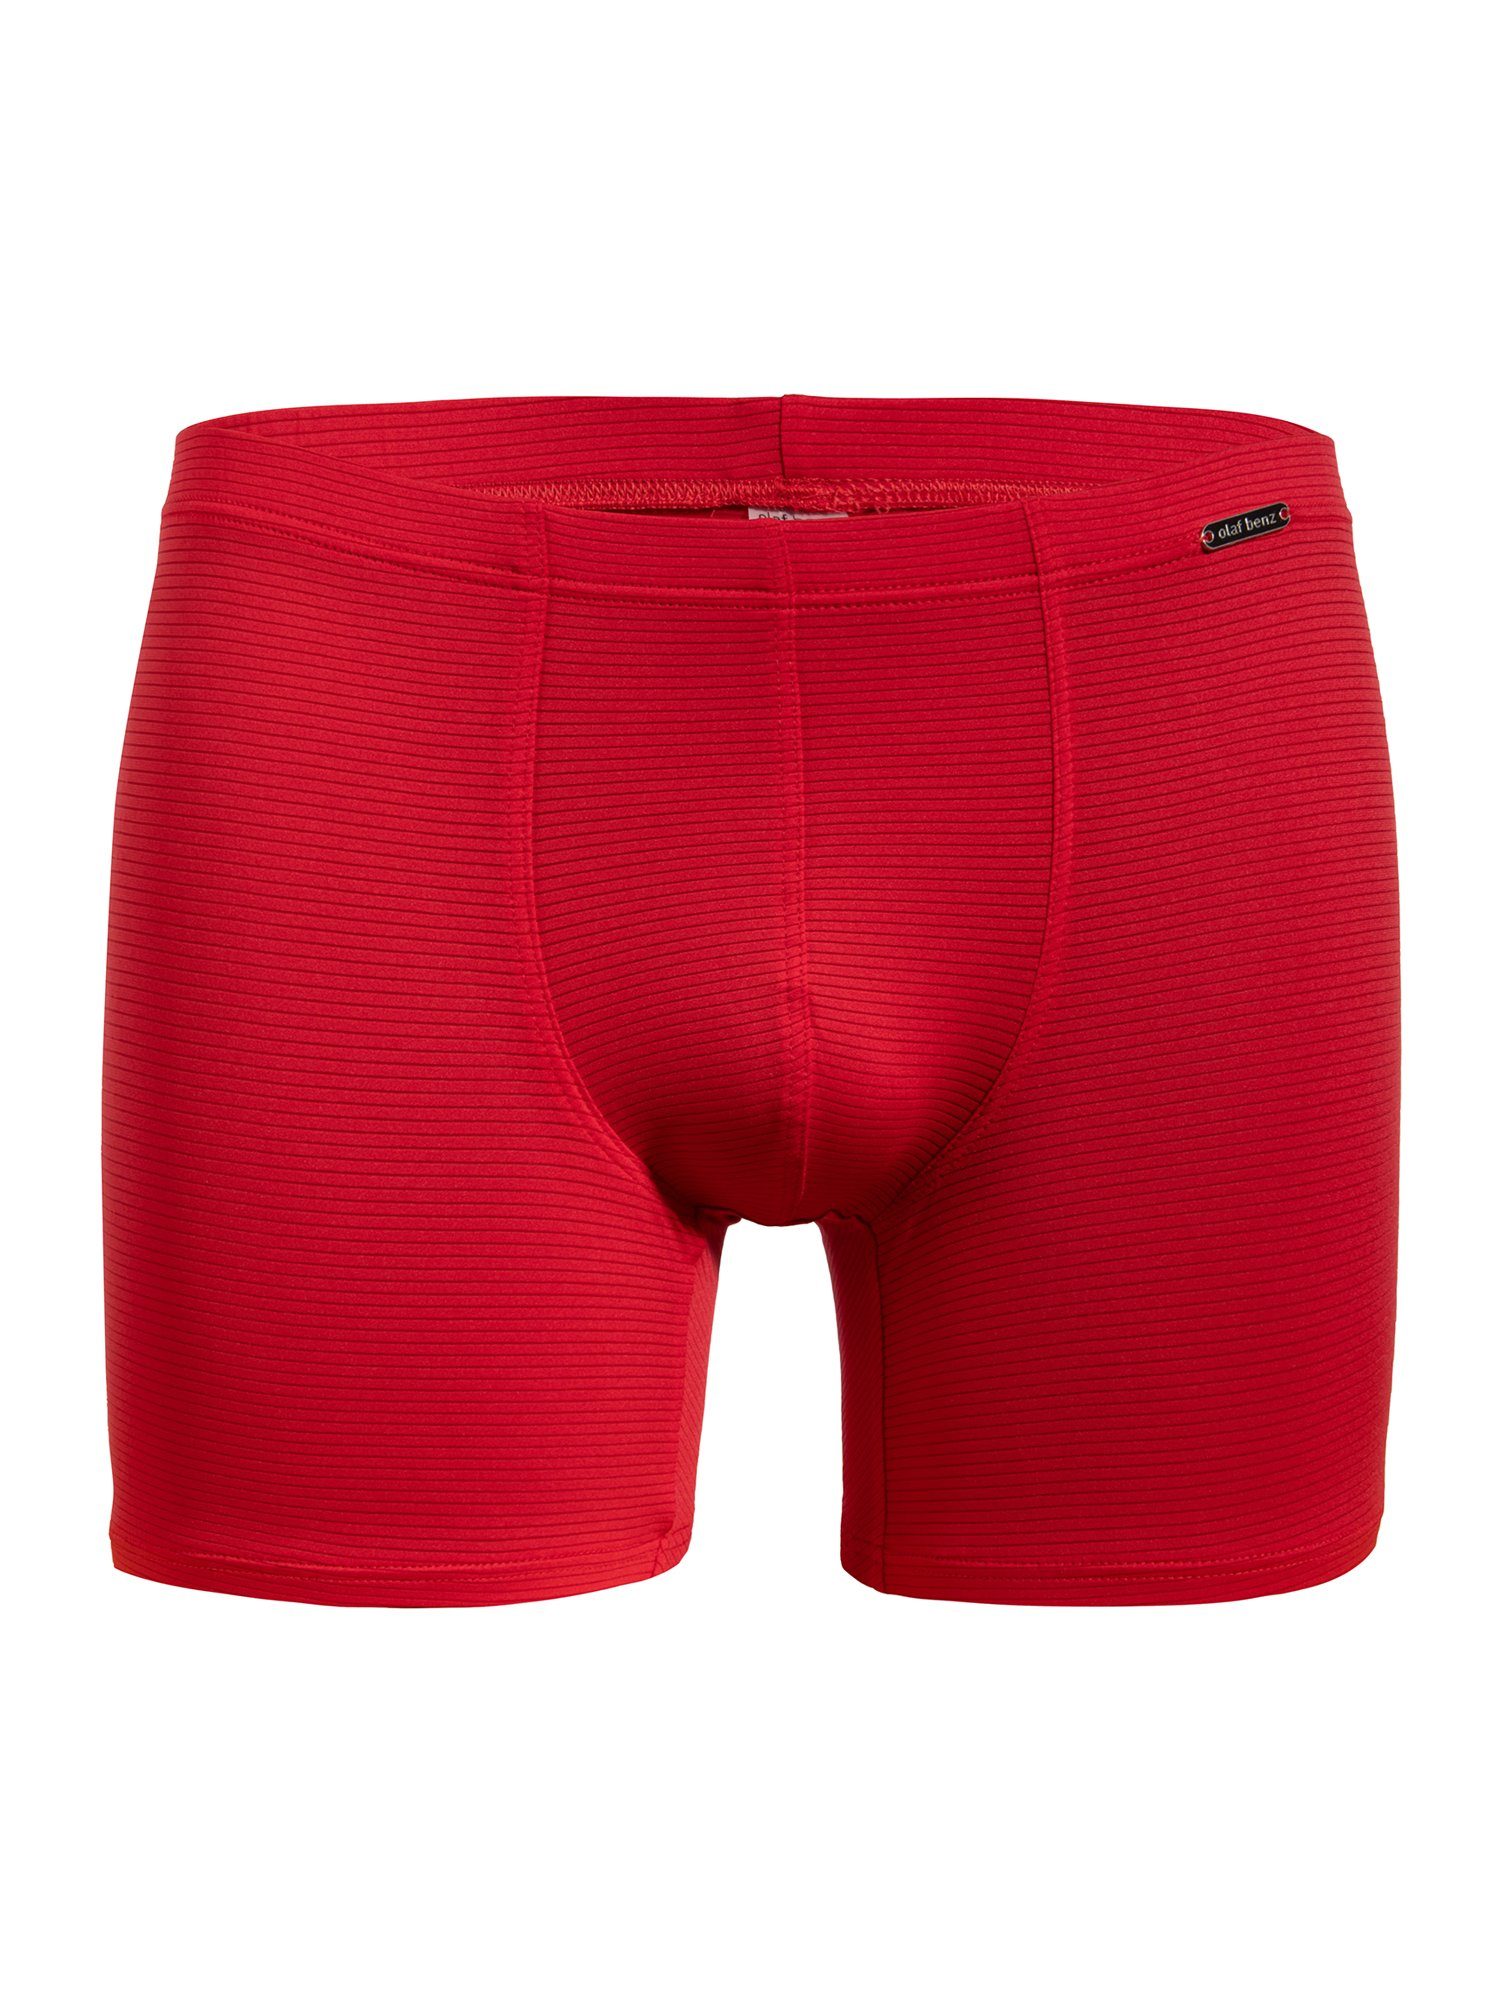 Olaf Benz Retro Boxer Boxerpants (1-St) RED1201